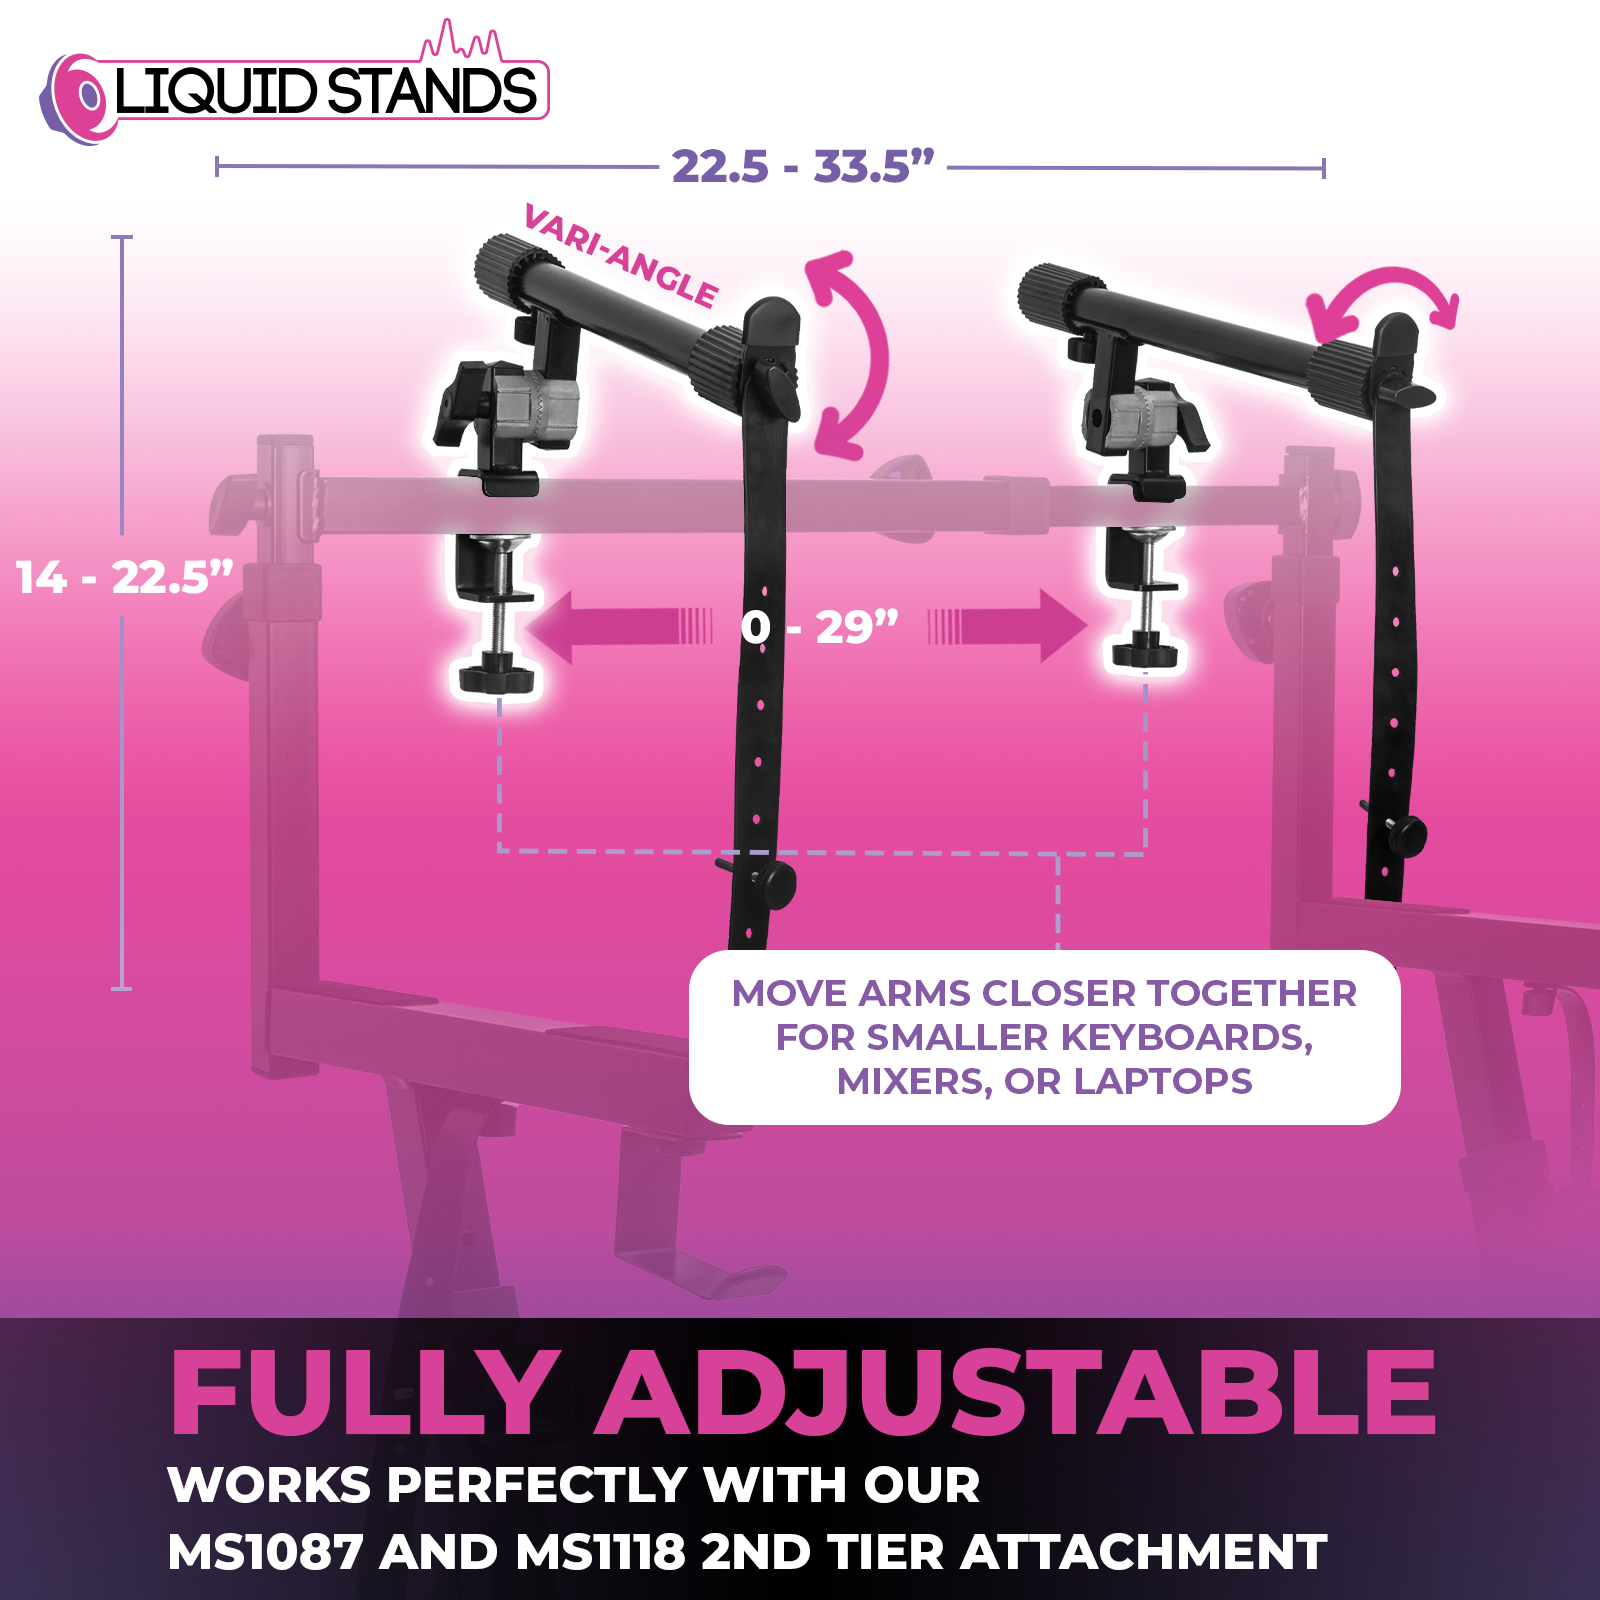 Adjustable 2-Tier Keyboard Stand Extender - Arms Only with Straps